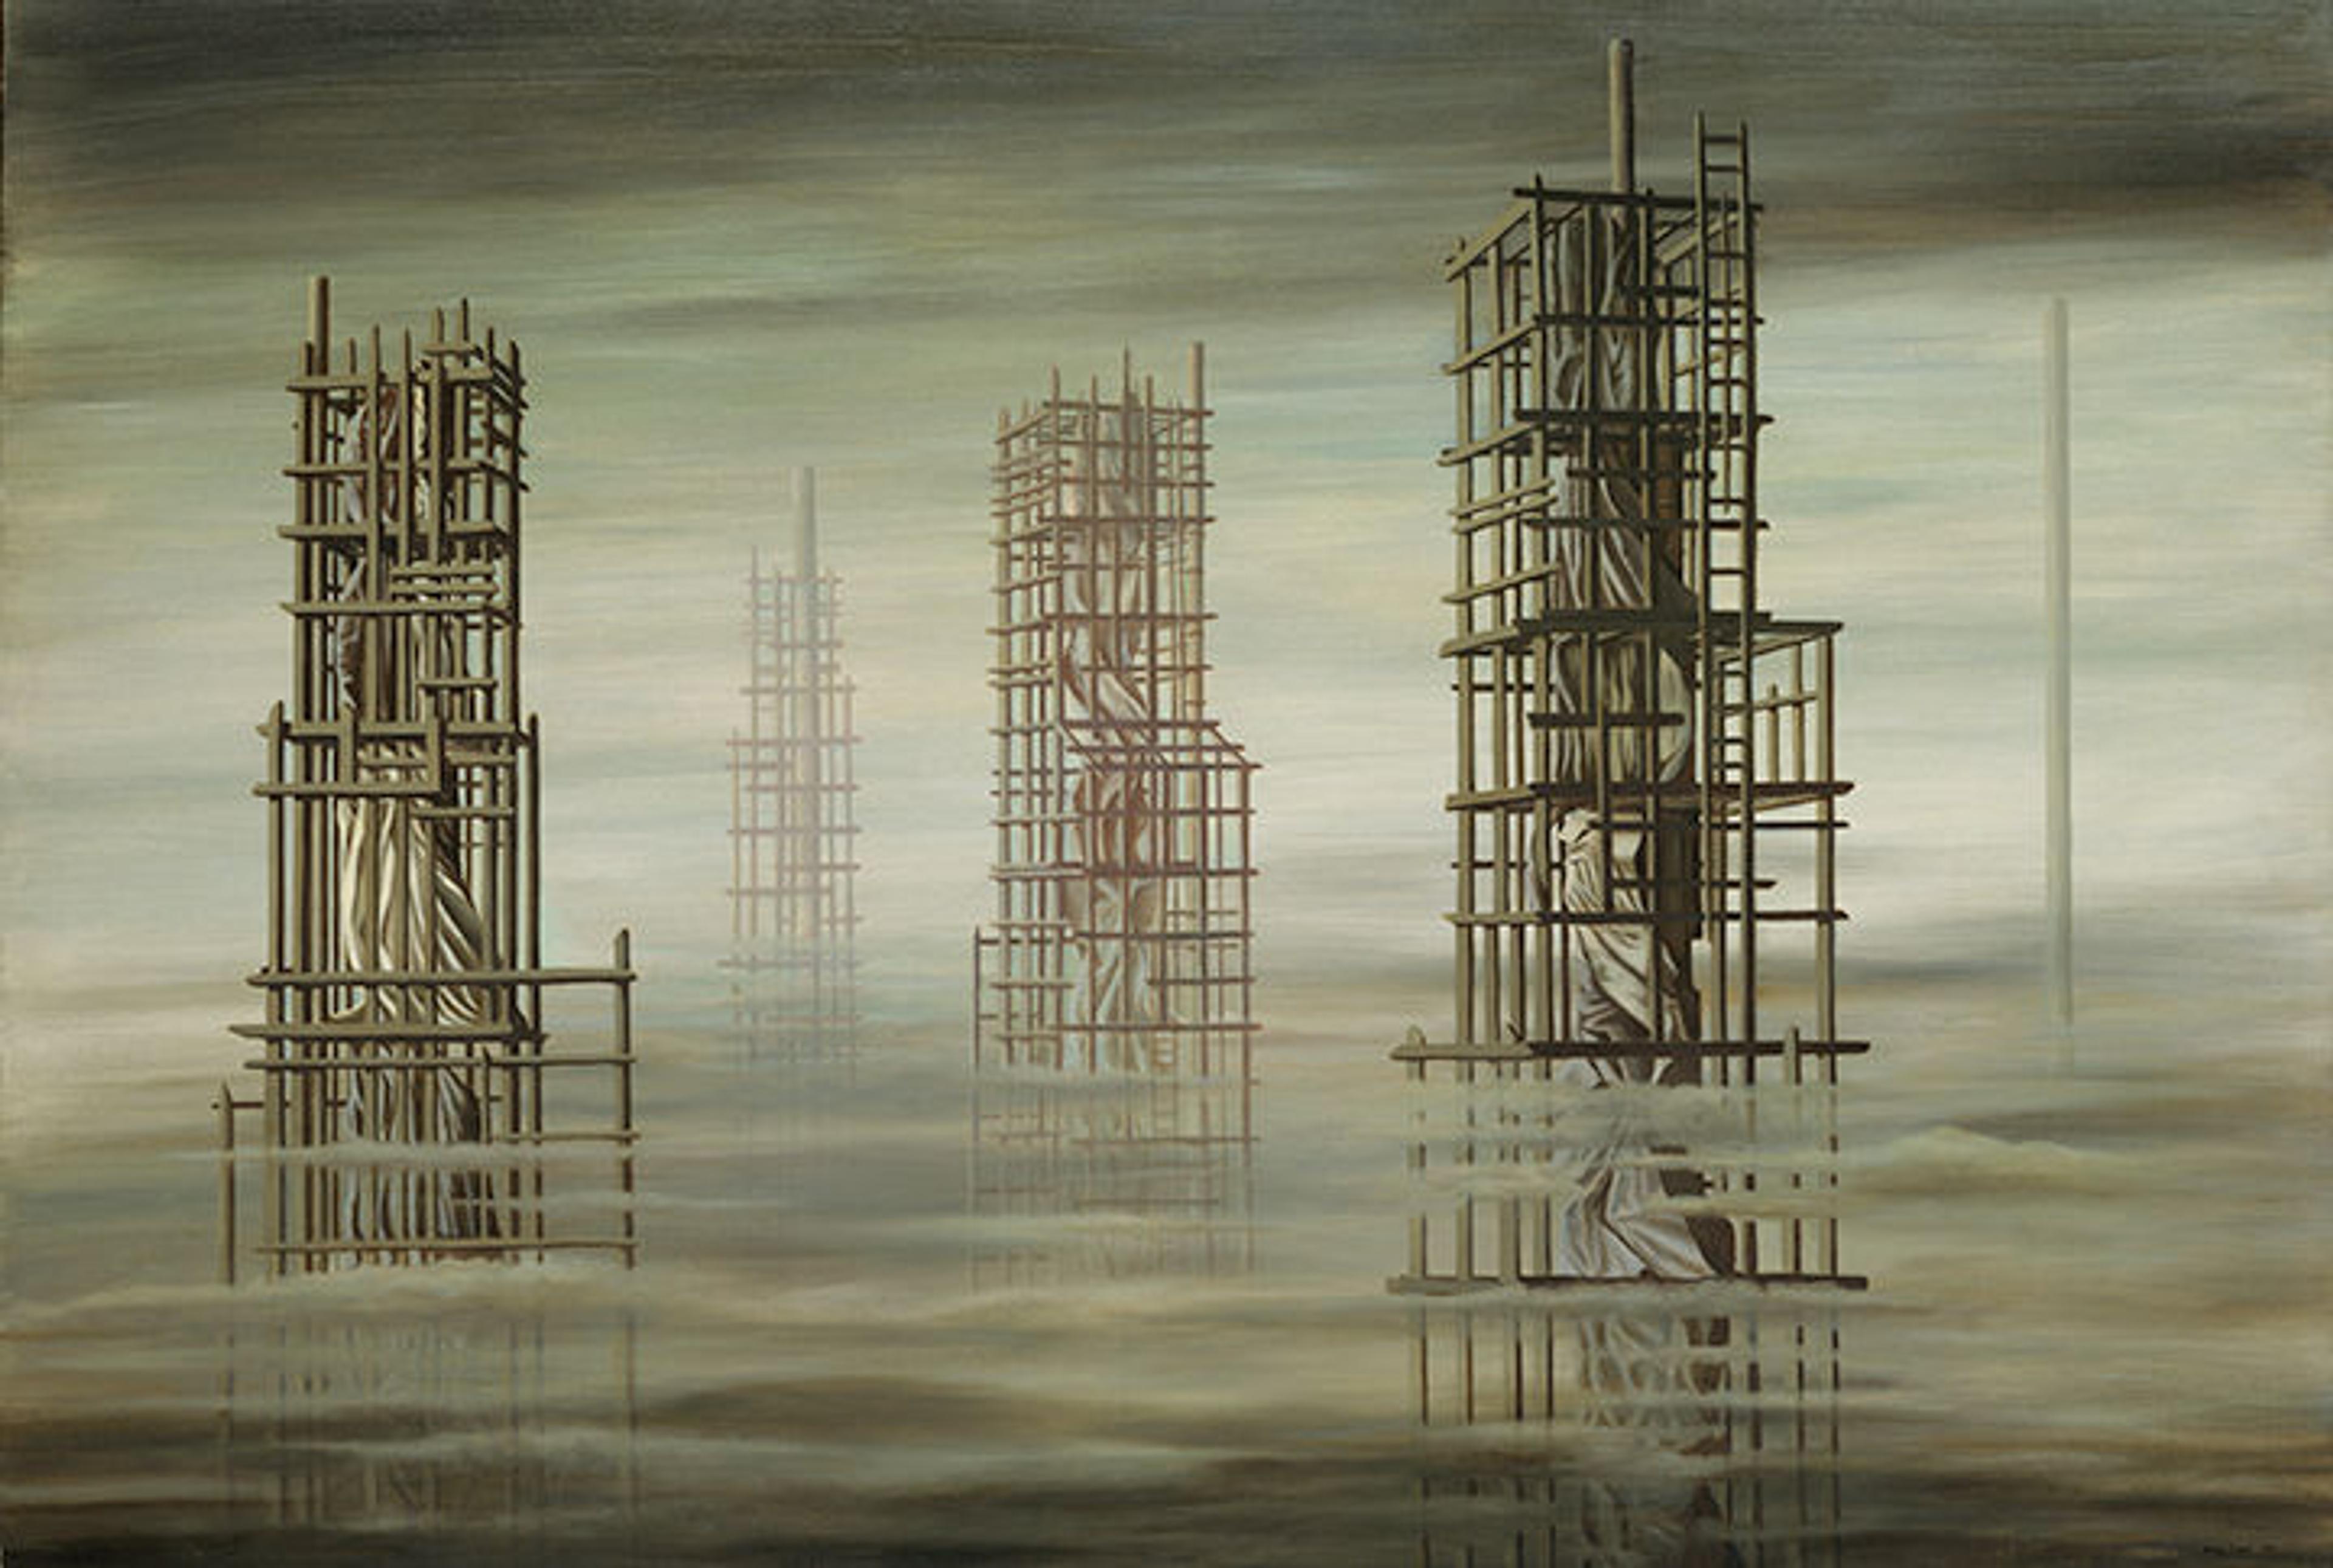 Kay Sage's painting depicts a made-up landscape with buildings floating in fog.